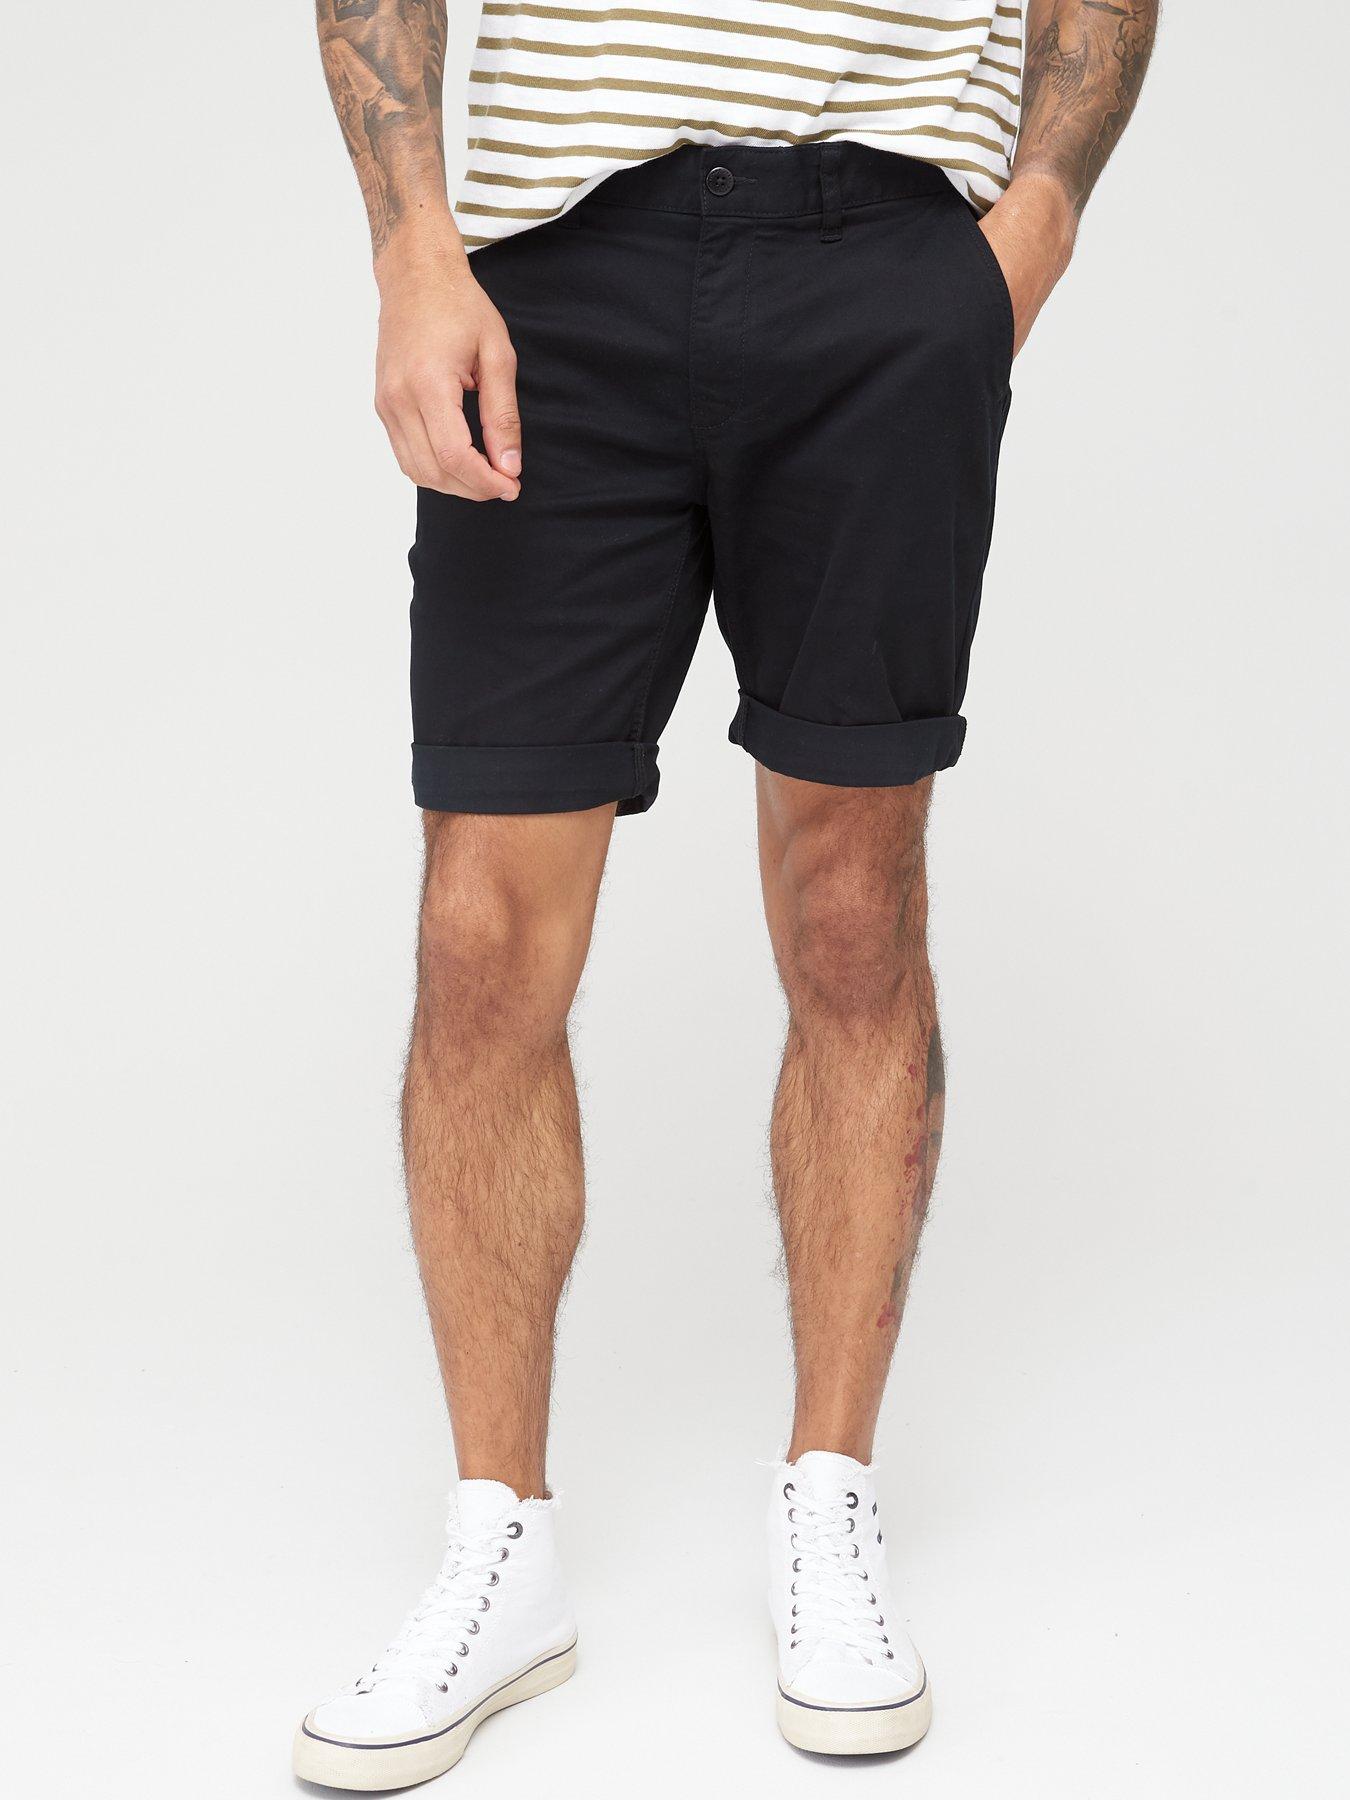 tommy jeans shorts mens